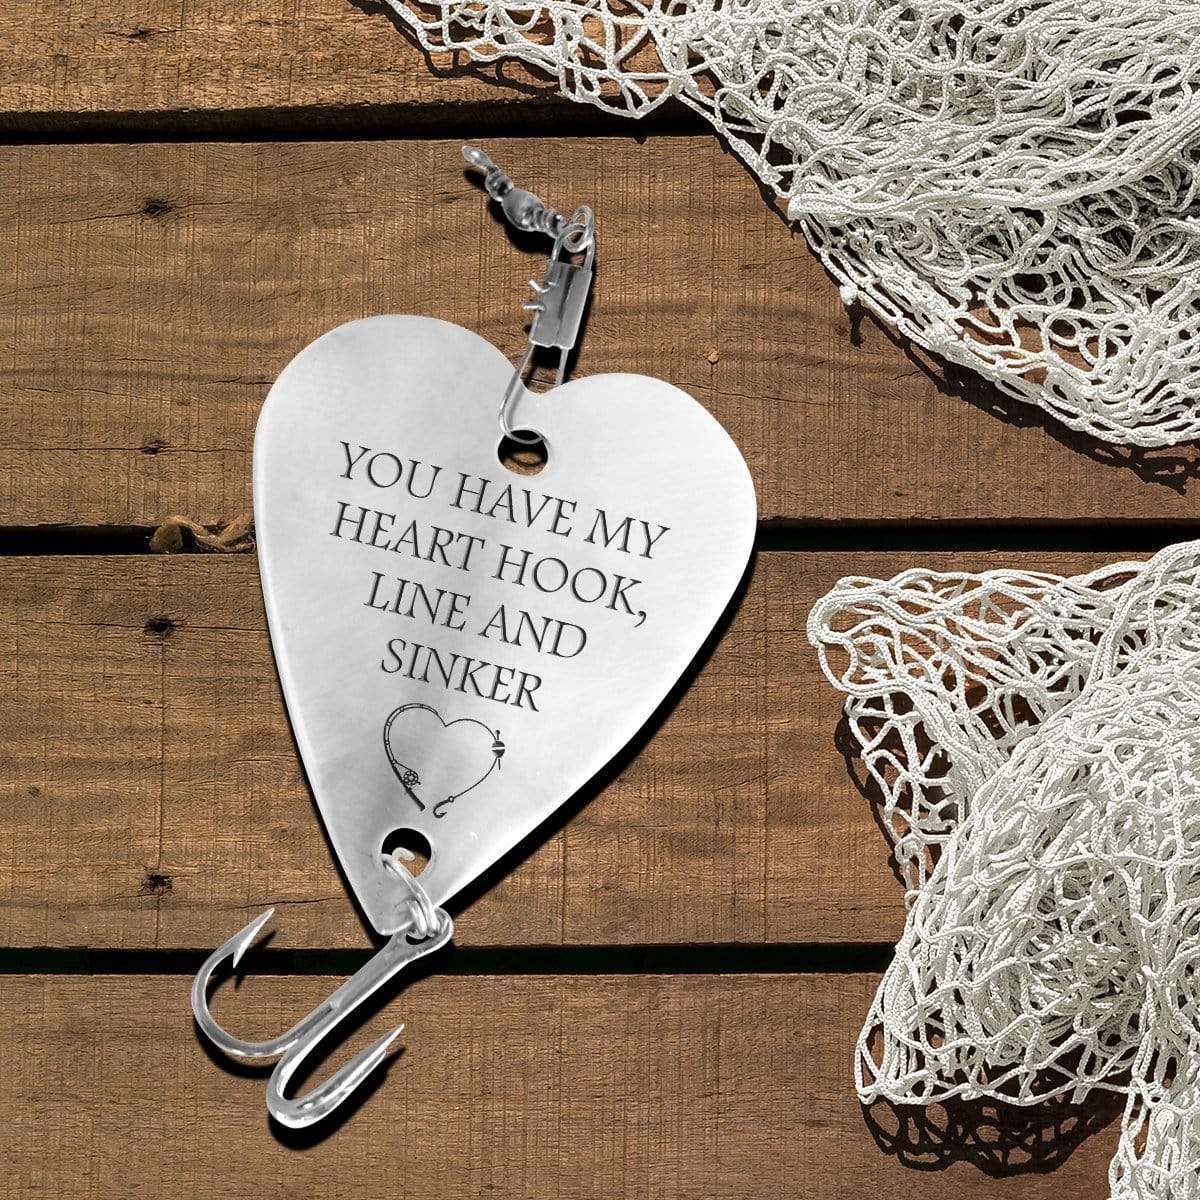 Heart Fishing Lure - To My Man - You Have My Heart Hook, Line And Sink -  Wrapsify